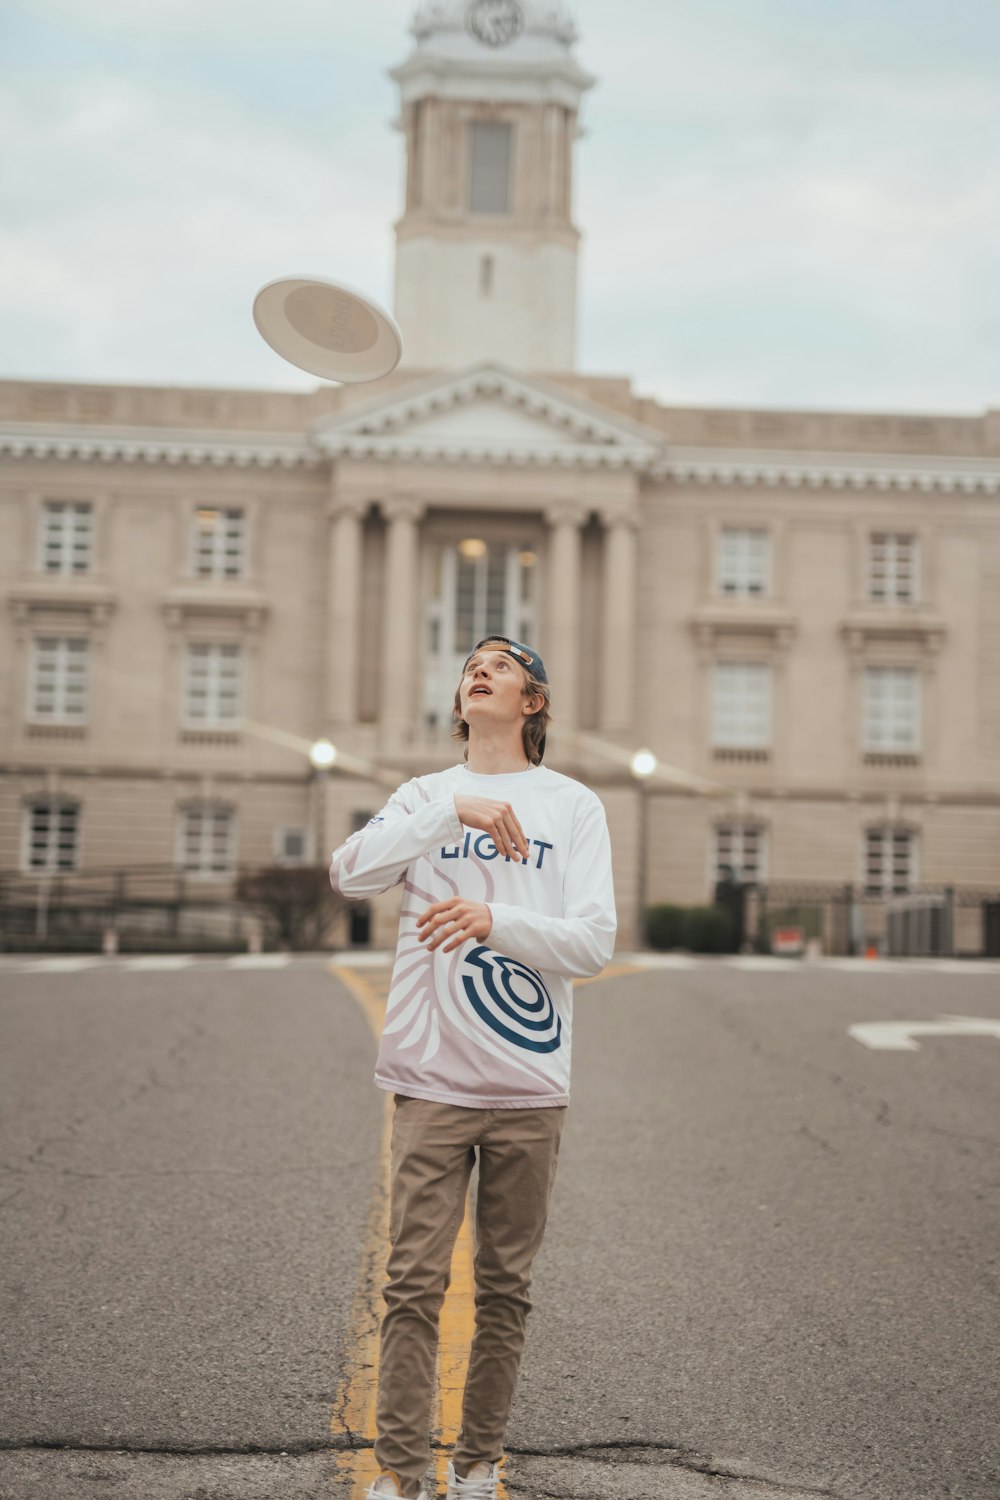 a man standing in front of a large building throwing a frisbee